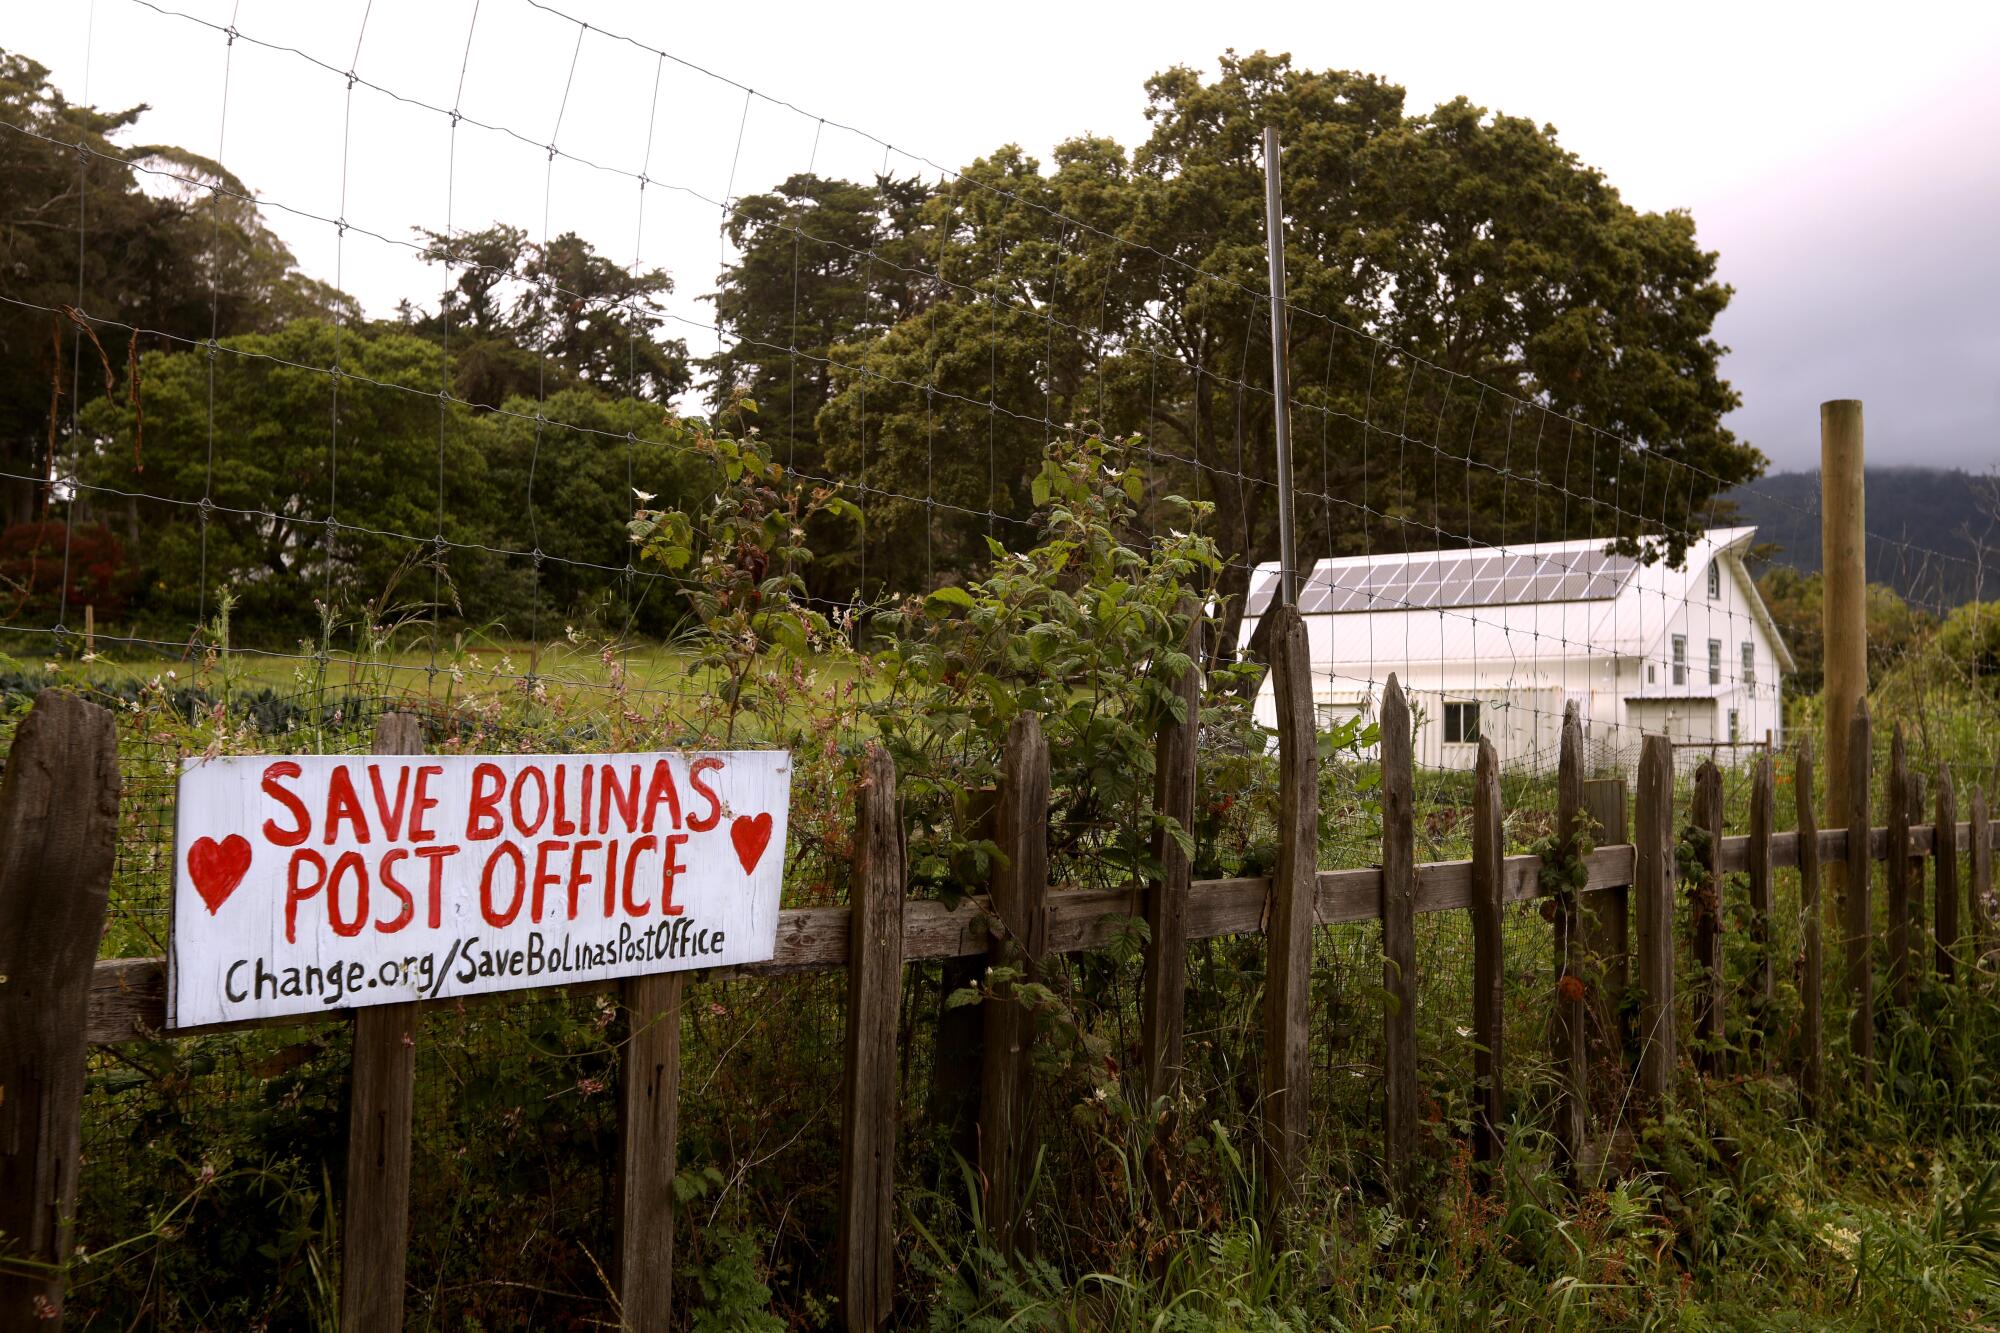 A hand-painted sign tacked to a picket fence calls for saving the Bolinas post office.